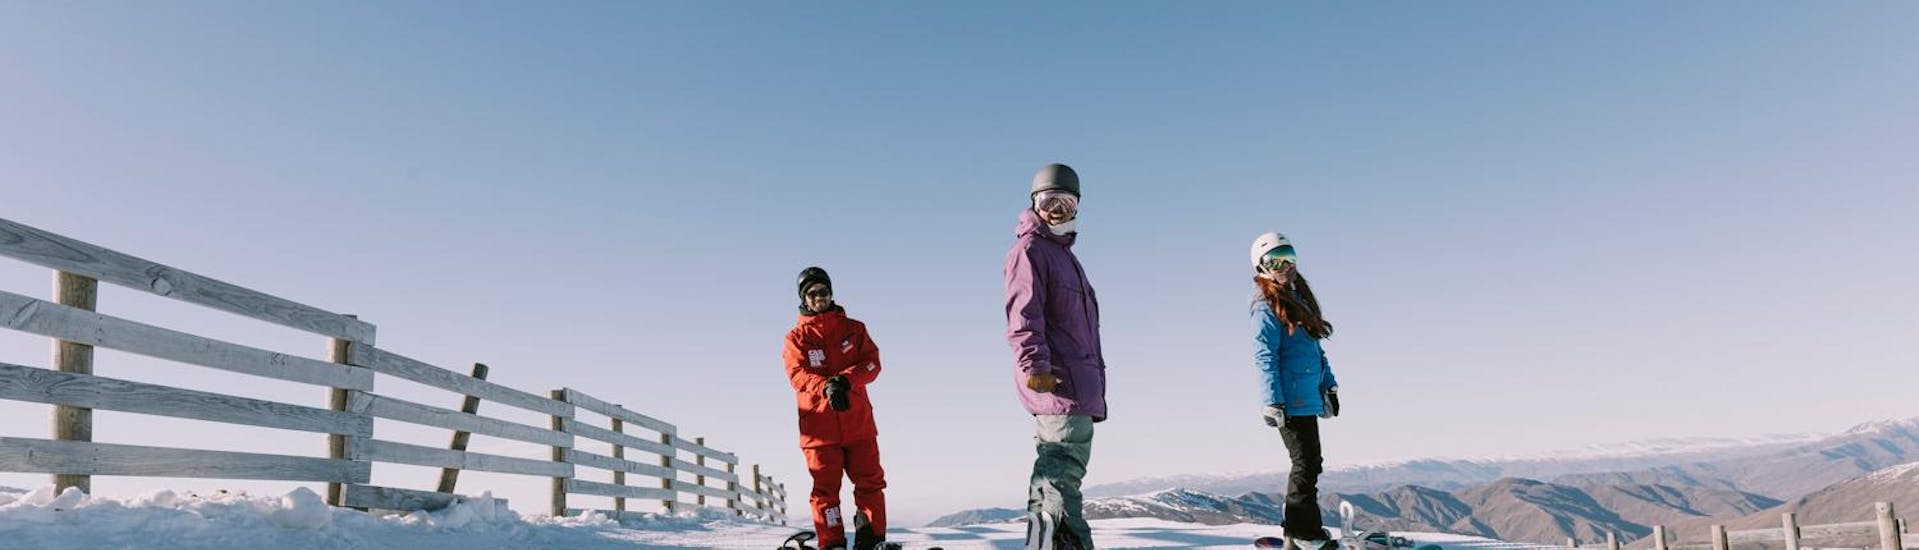 Snowboarding Lessons for Adults - All Levels - With Transfer.